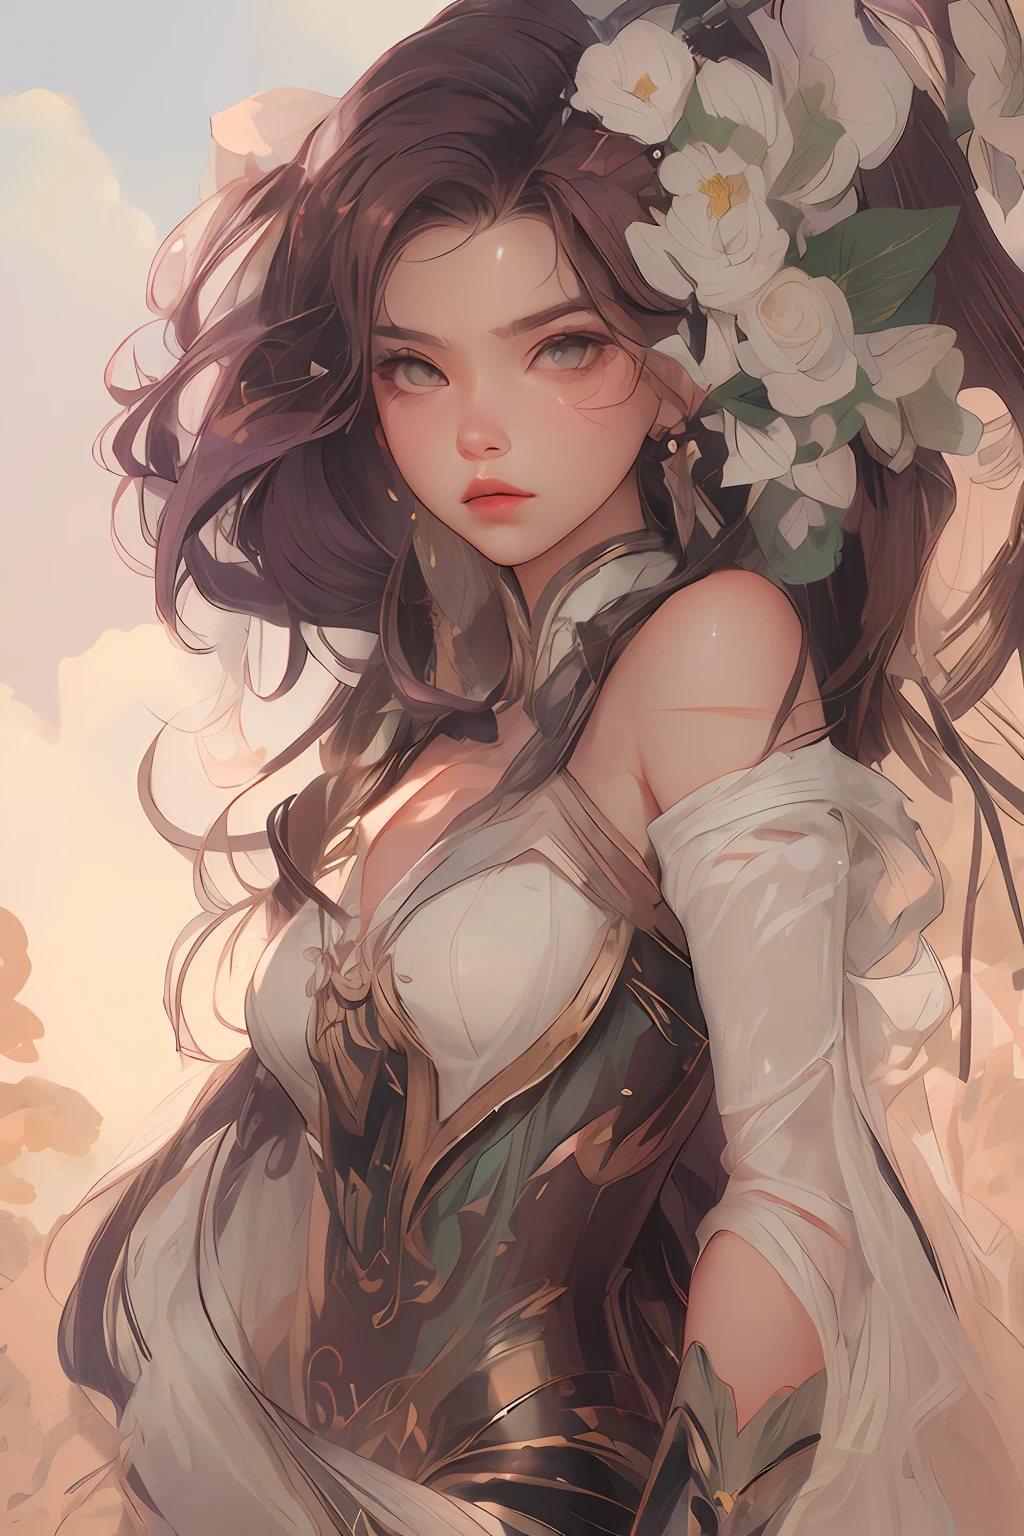 there is a drawing of a woman with long hair and flowers in her hair, drawn in the style of artgerm, artgerm. high detail, artgerm portrait, extremely detailed artgerm, artgerm lau, artgerm detailed, artgerm style, artgerm comic, in style of artgerm, artgerm and rossdraws